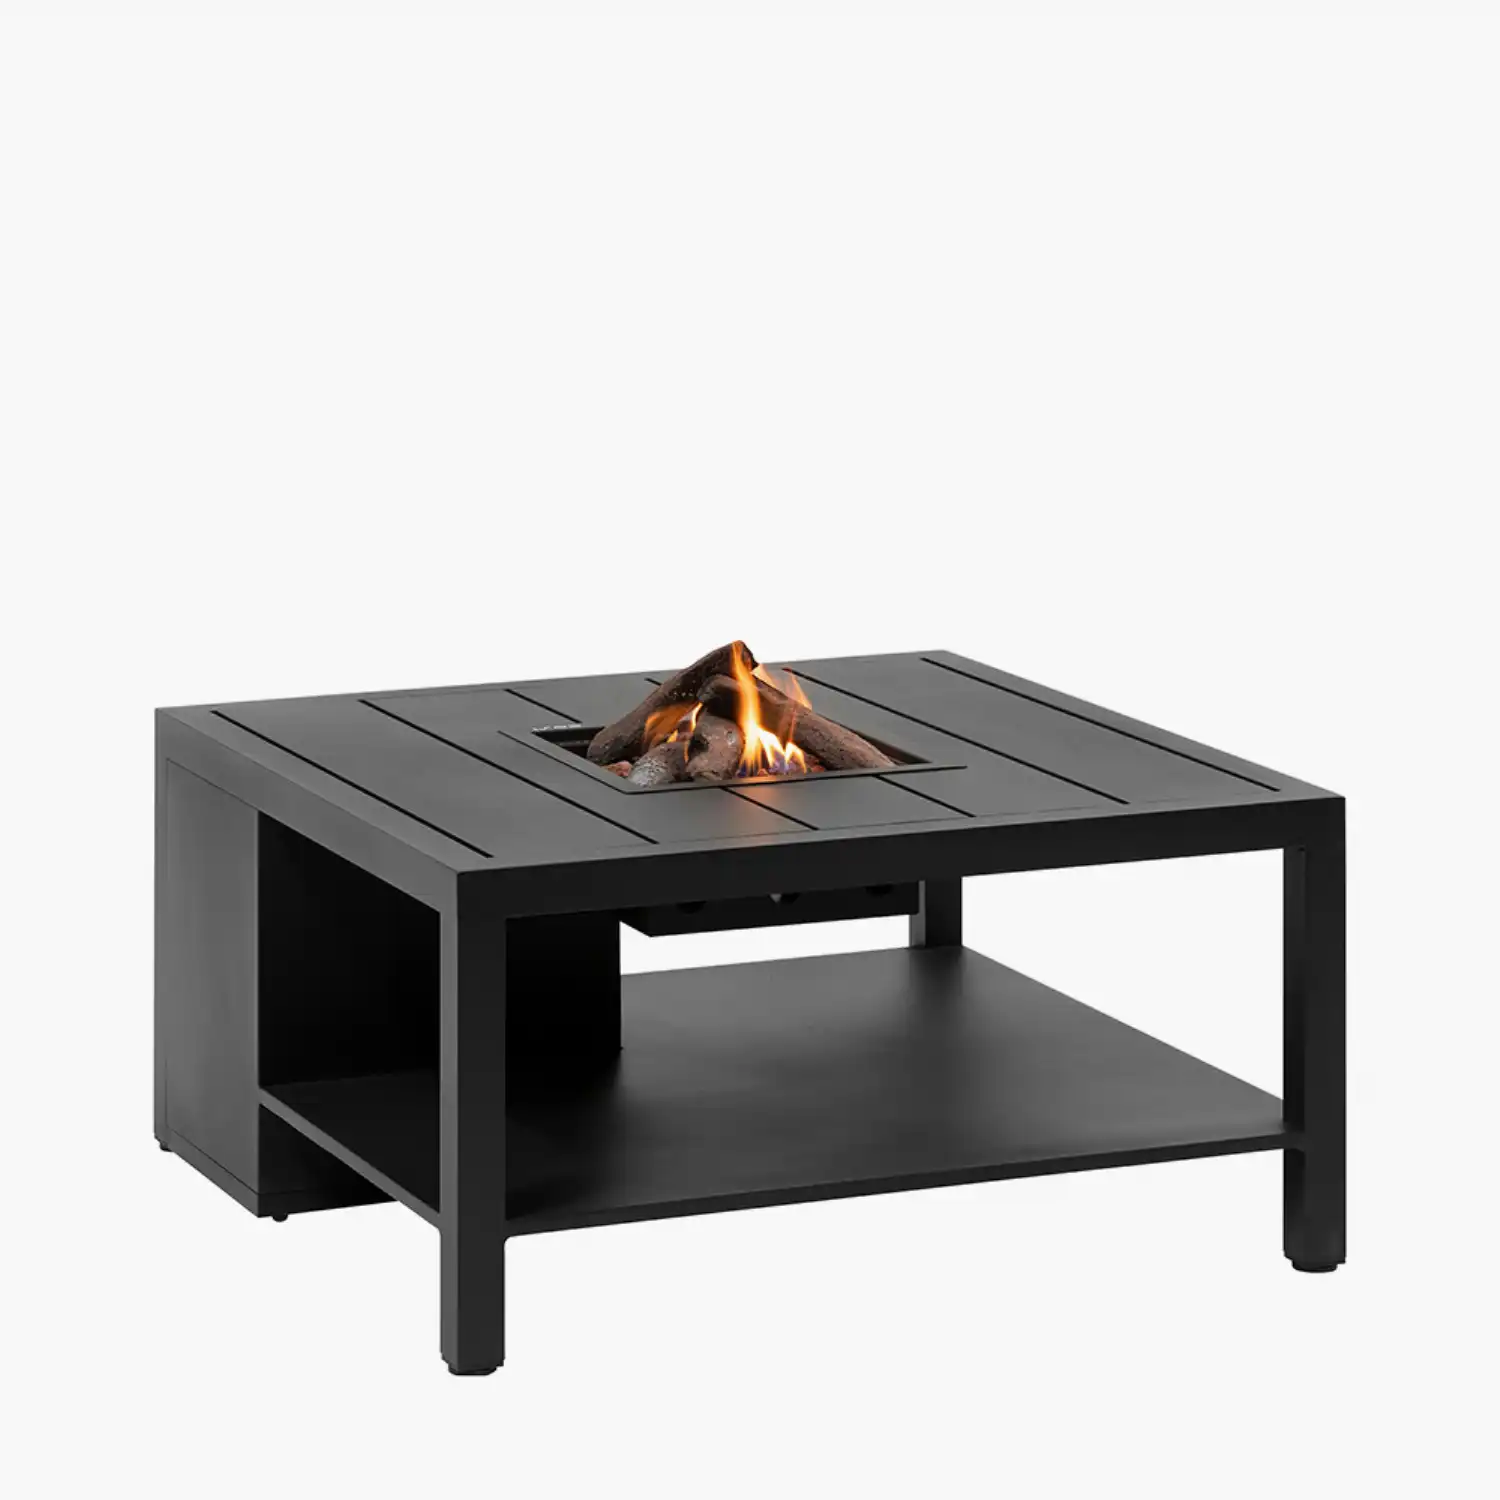 Anthracite Grey Metal Garden Square 100cm Fire Pit Table